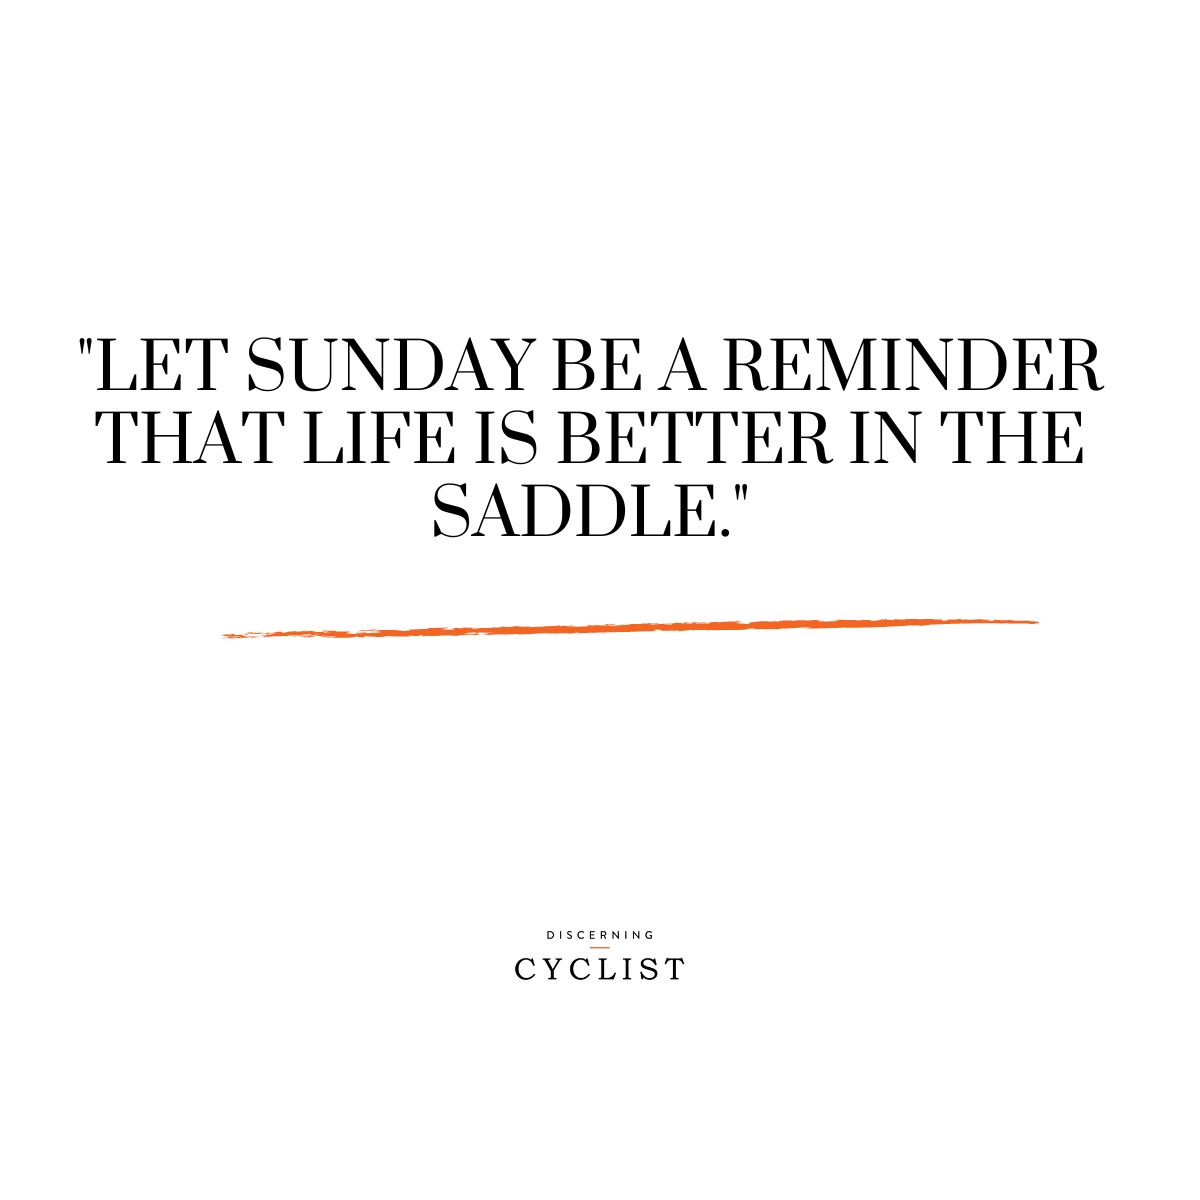 "Let Sunday be a reminder that life is better in the saddle."